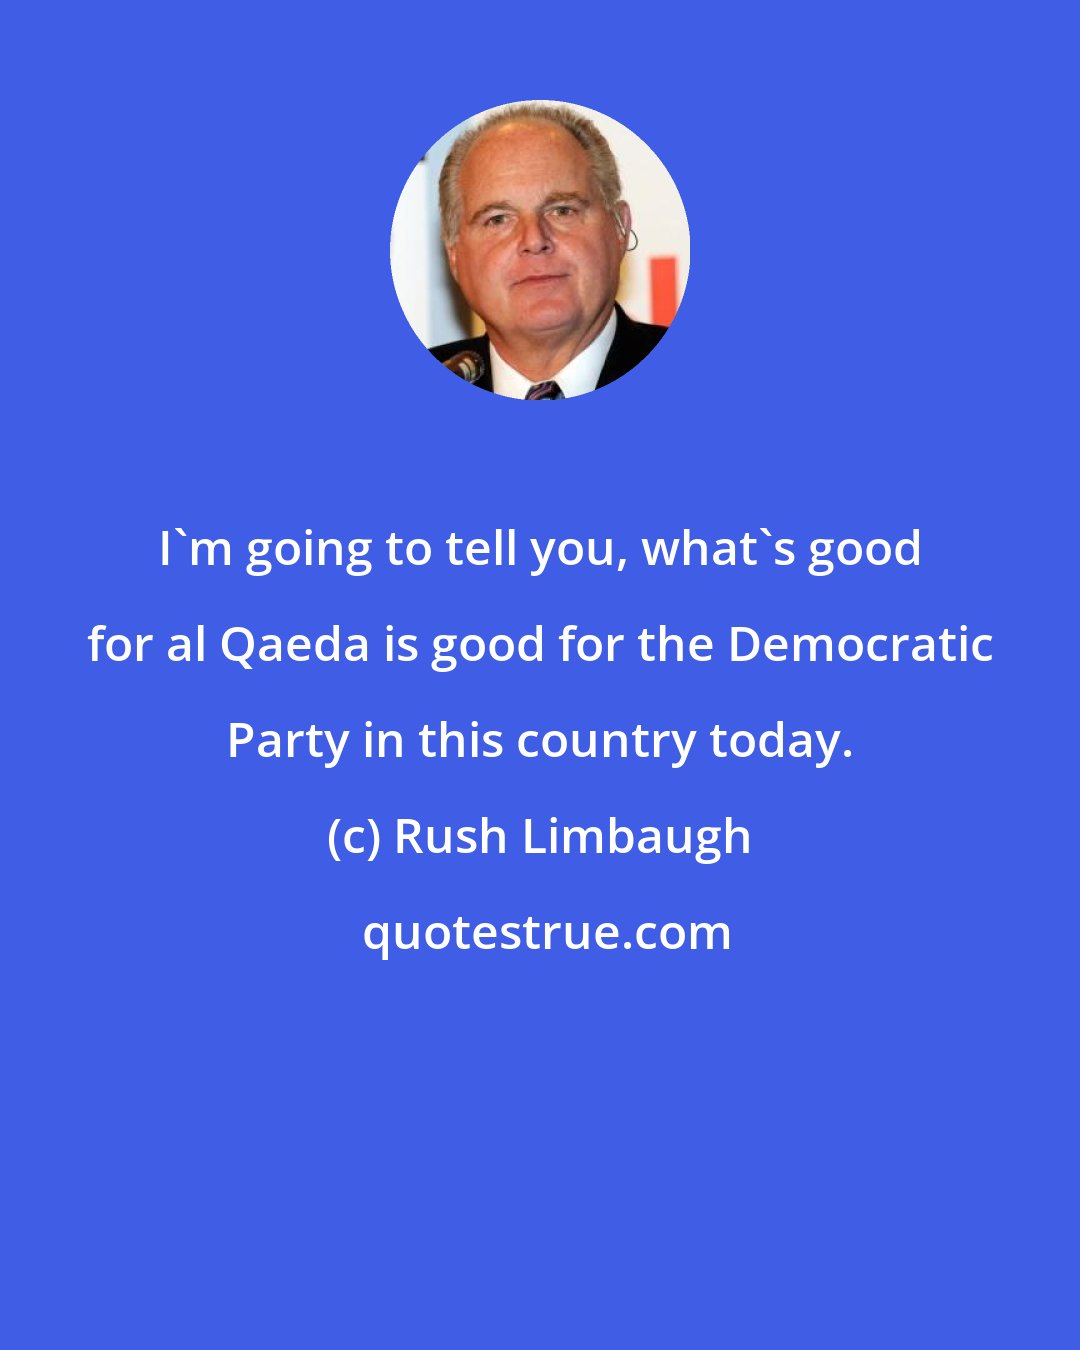 Rush Limbaugh: I'm going to tell you, what's good for al Qaeda is good for the Democratic Party in this country today.